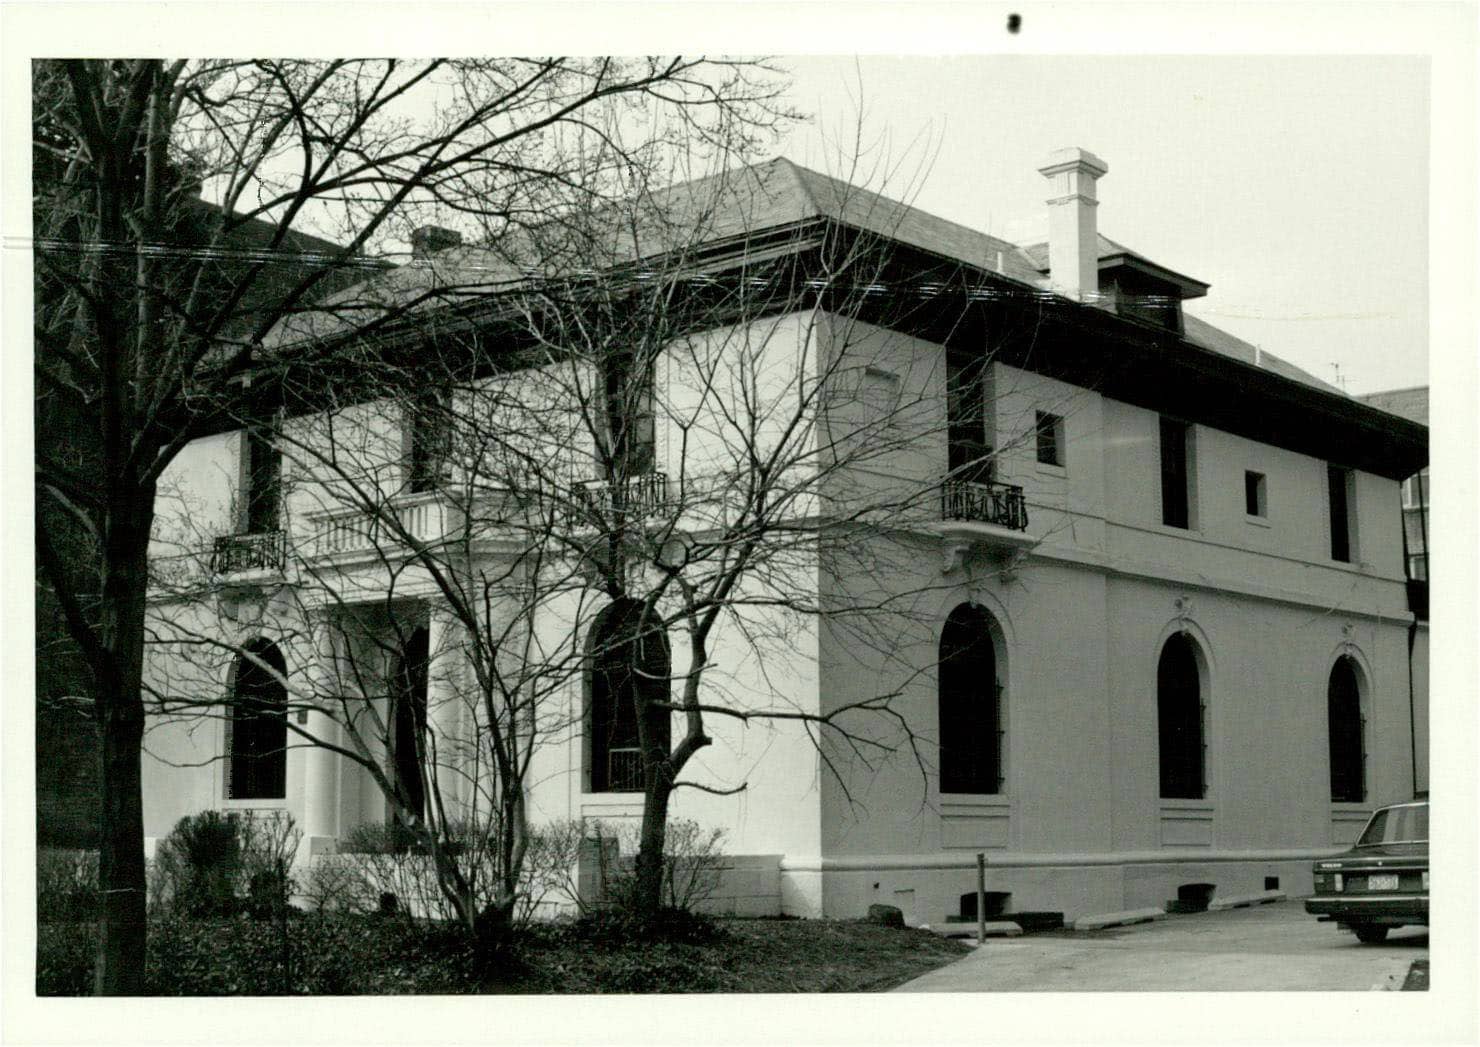 NAFSA’s first office in DC, 1966 – 1991.